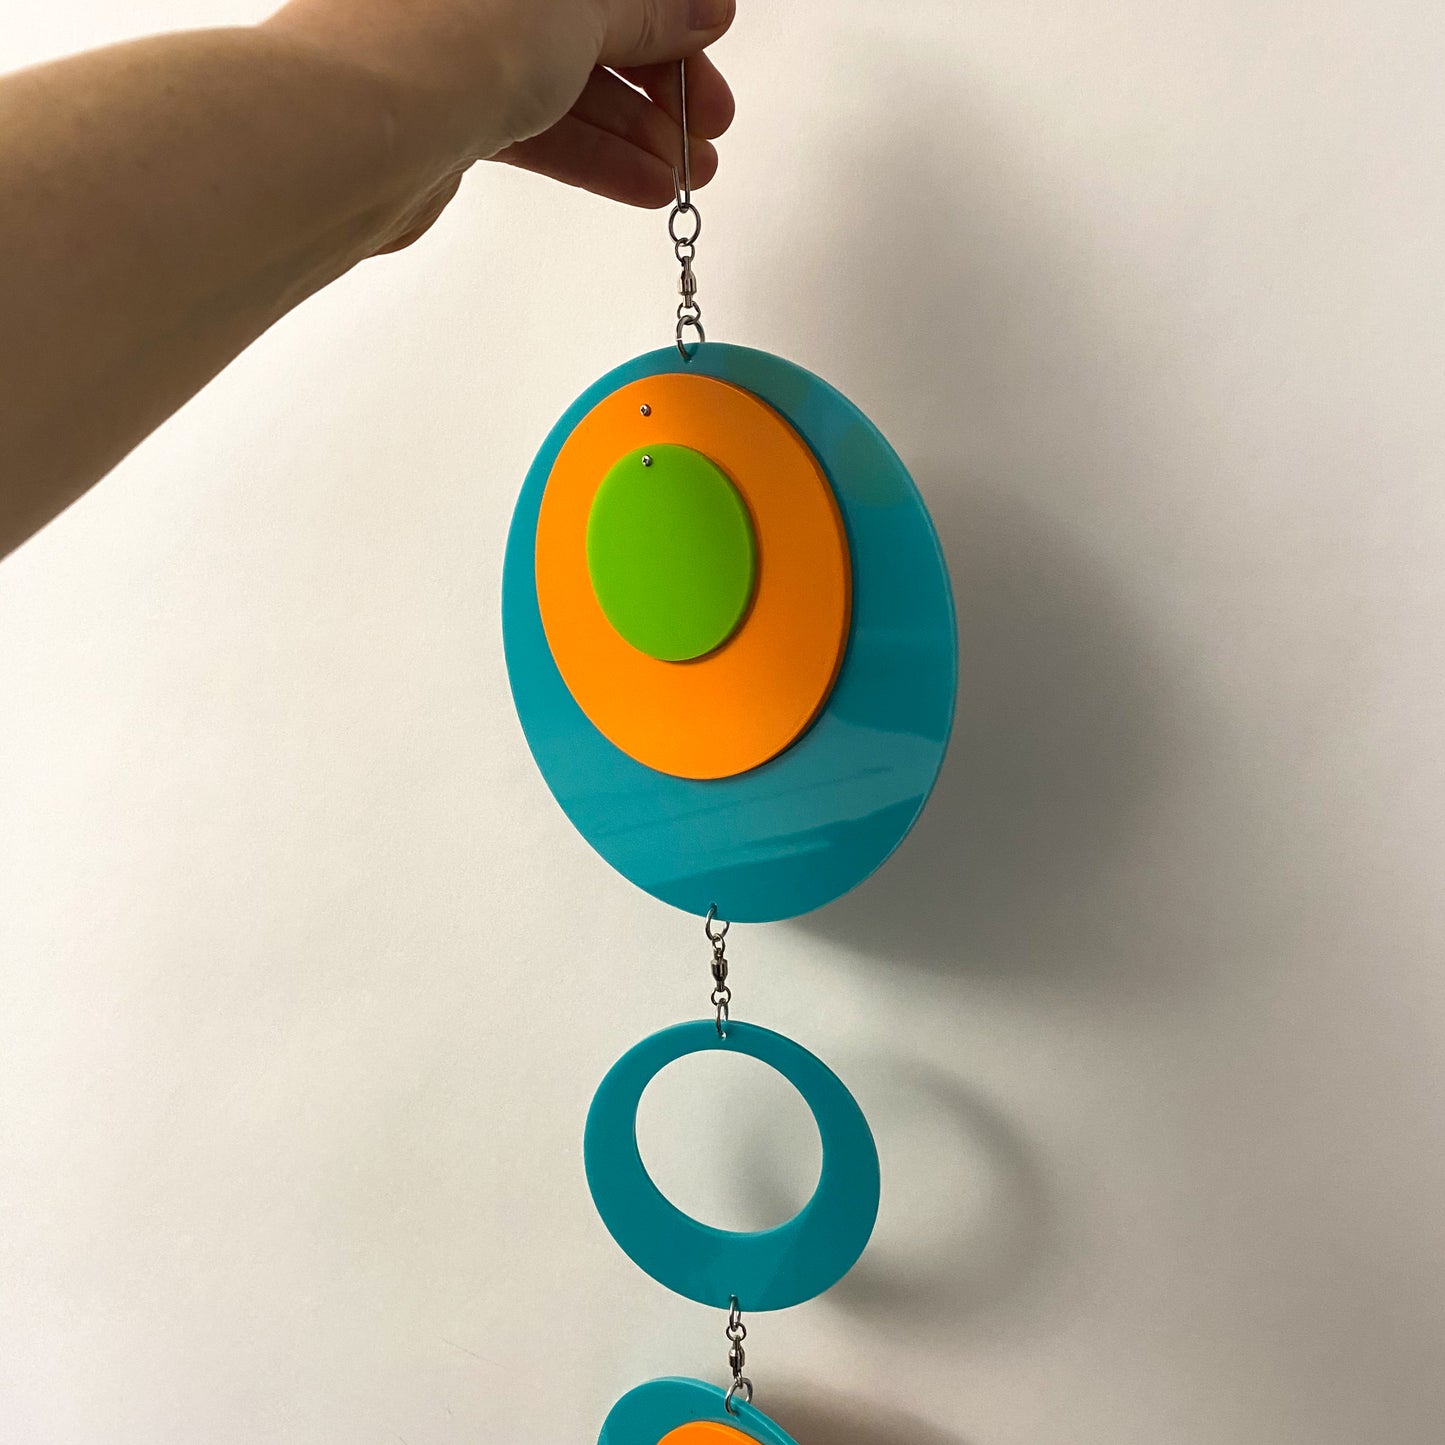 Holding the beautiful Palm Springs Wall Art Mobile in Aqua Blue, Orange, and Lime Green by AtomicMobiles.com